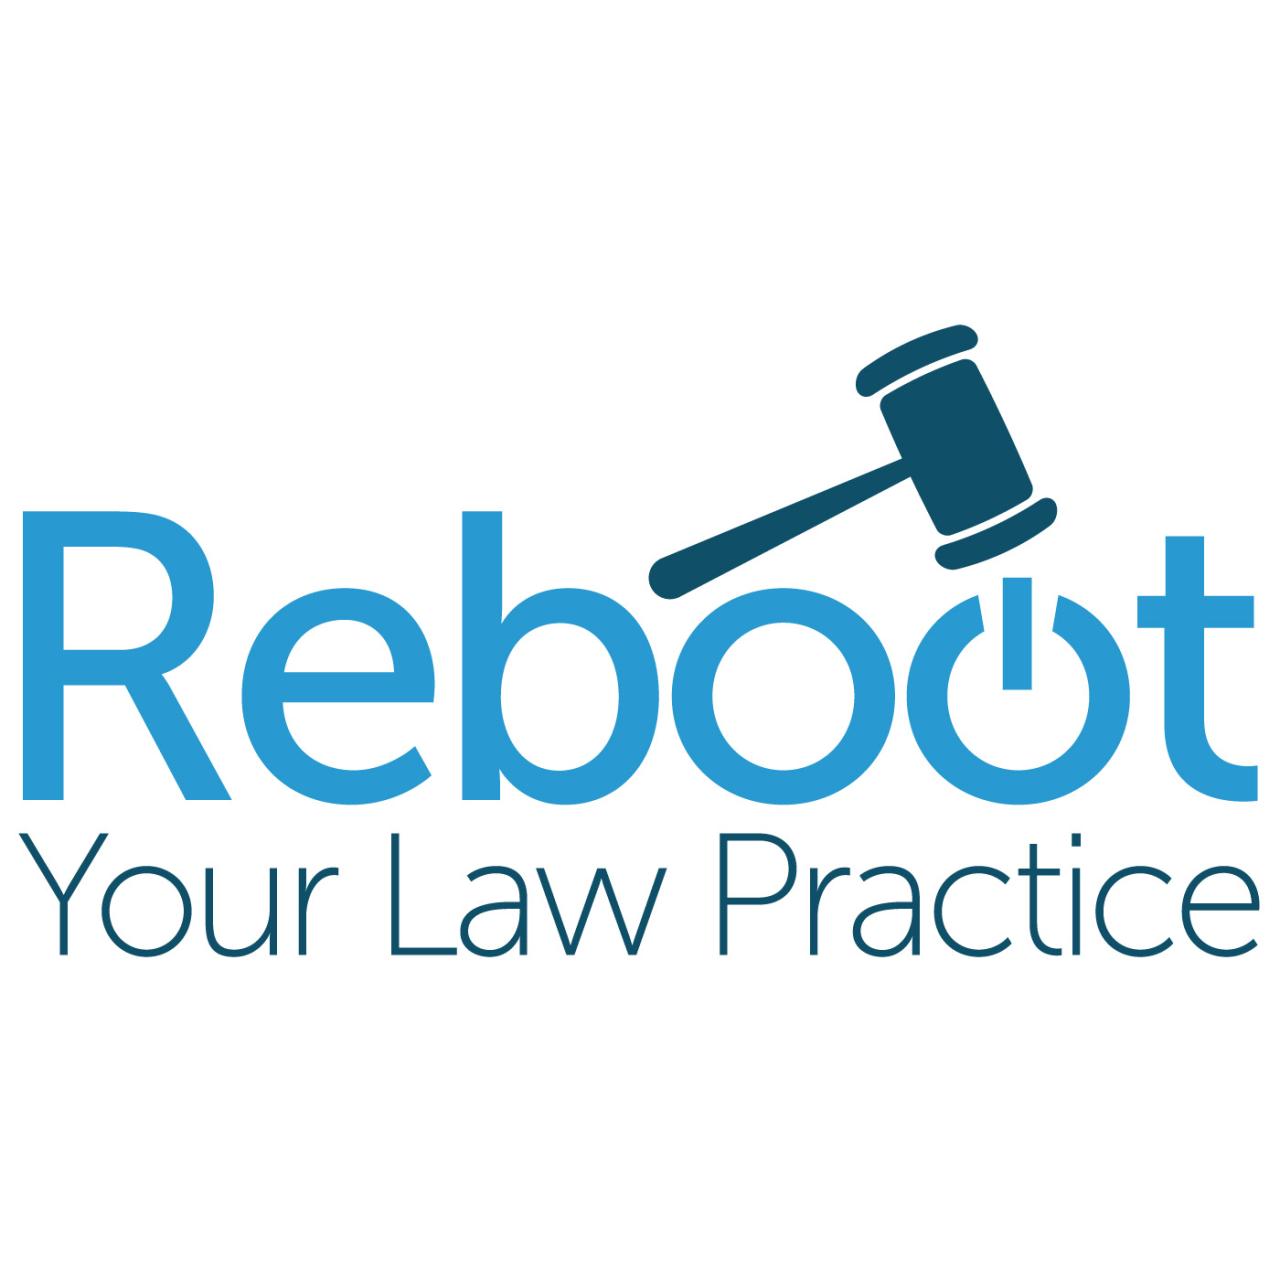 Reboot your law practice podcast 2 be the ceo of your practice